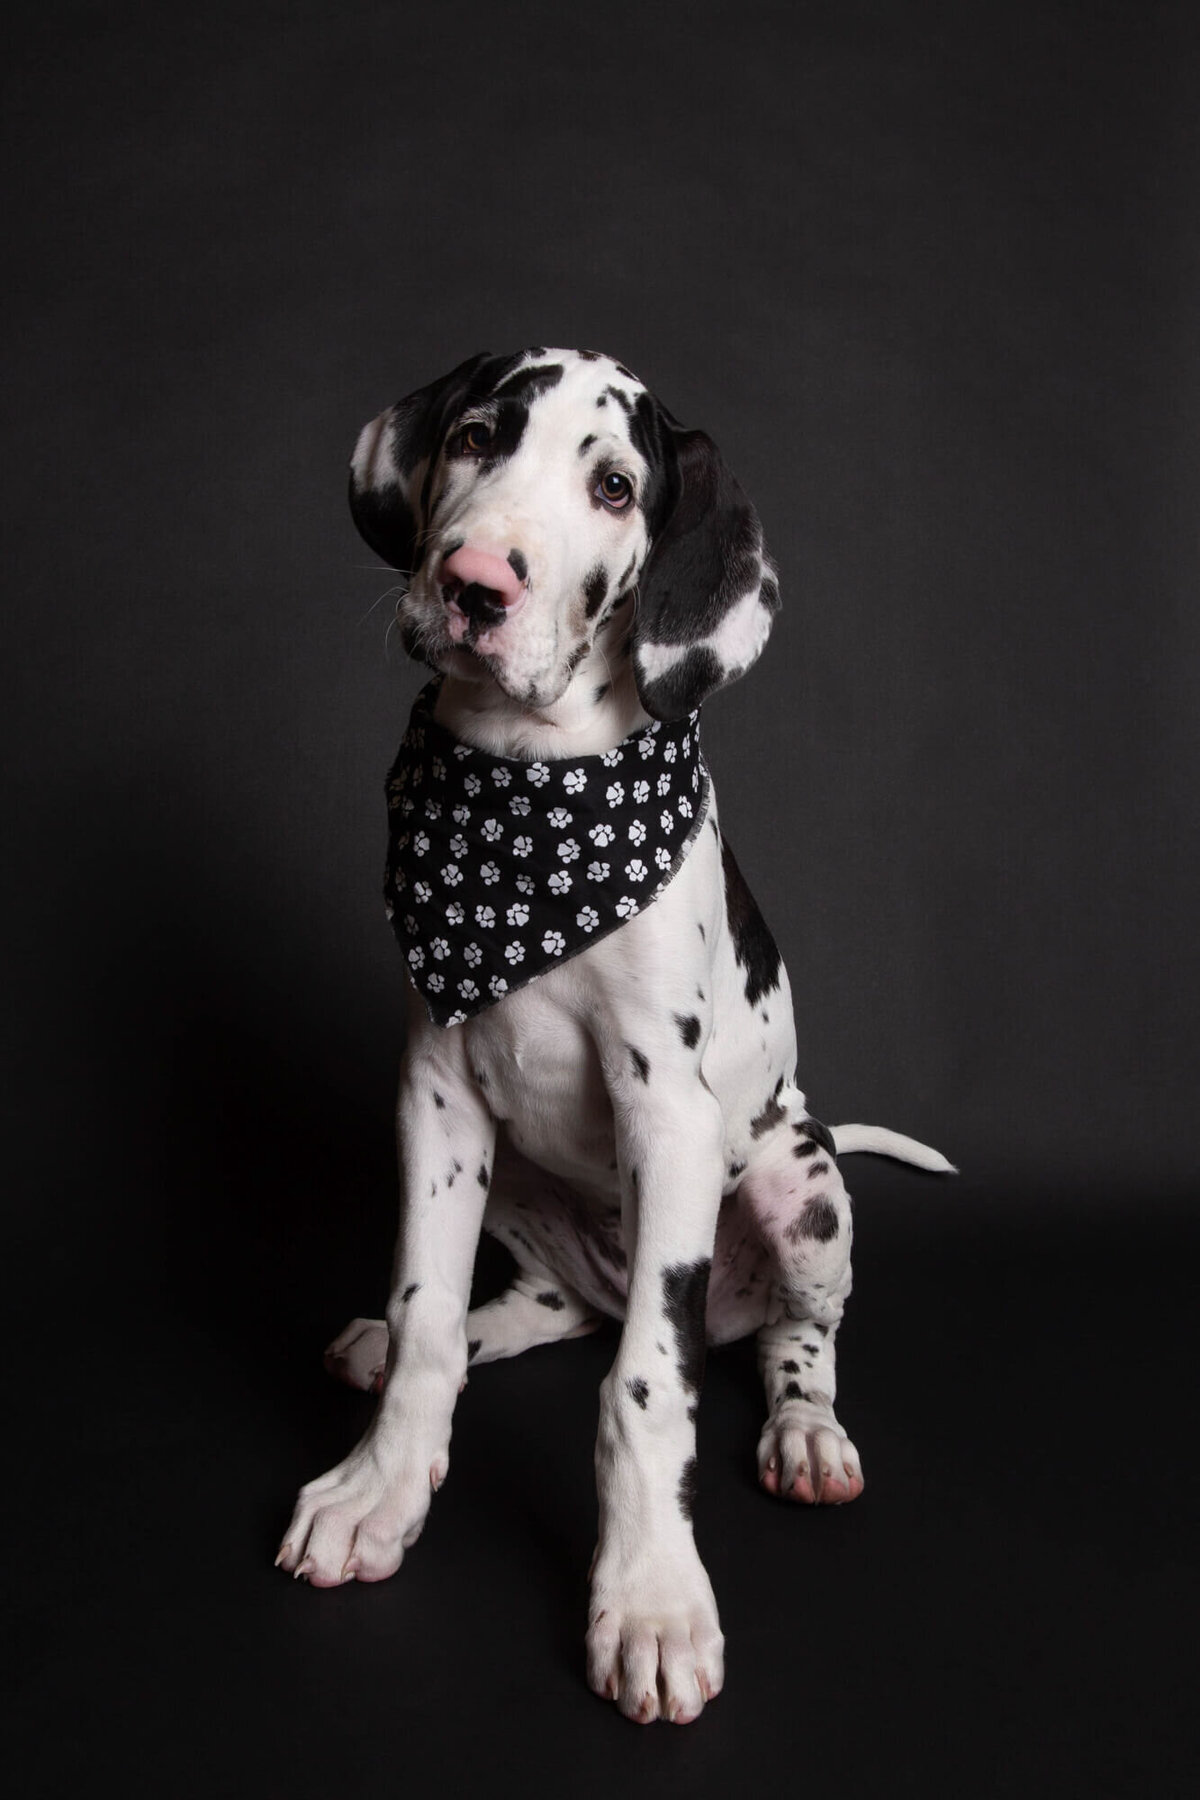 Black and white merle Great Dane puppy on black backdrop